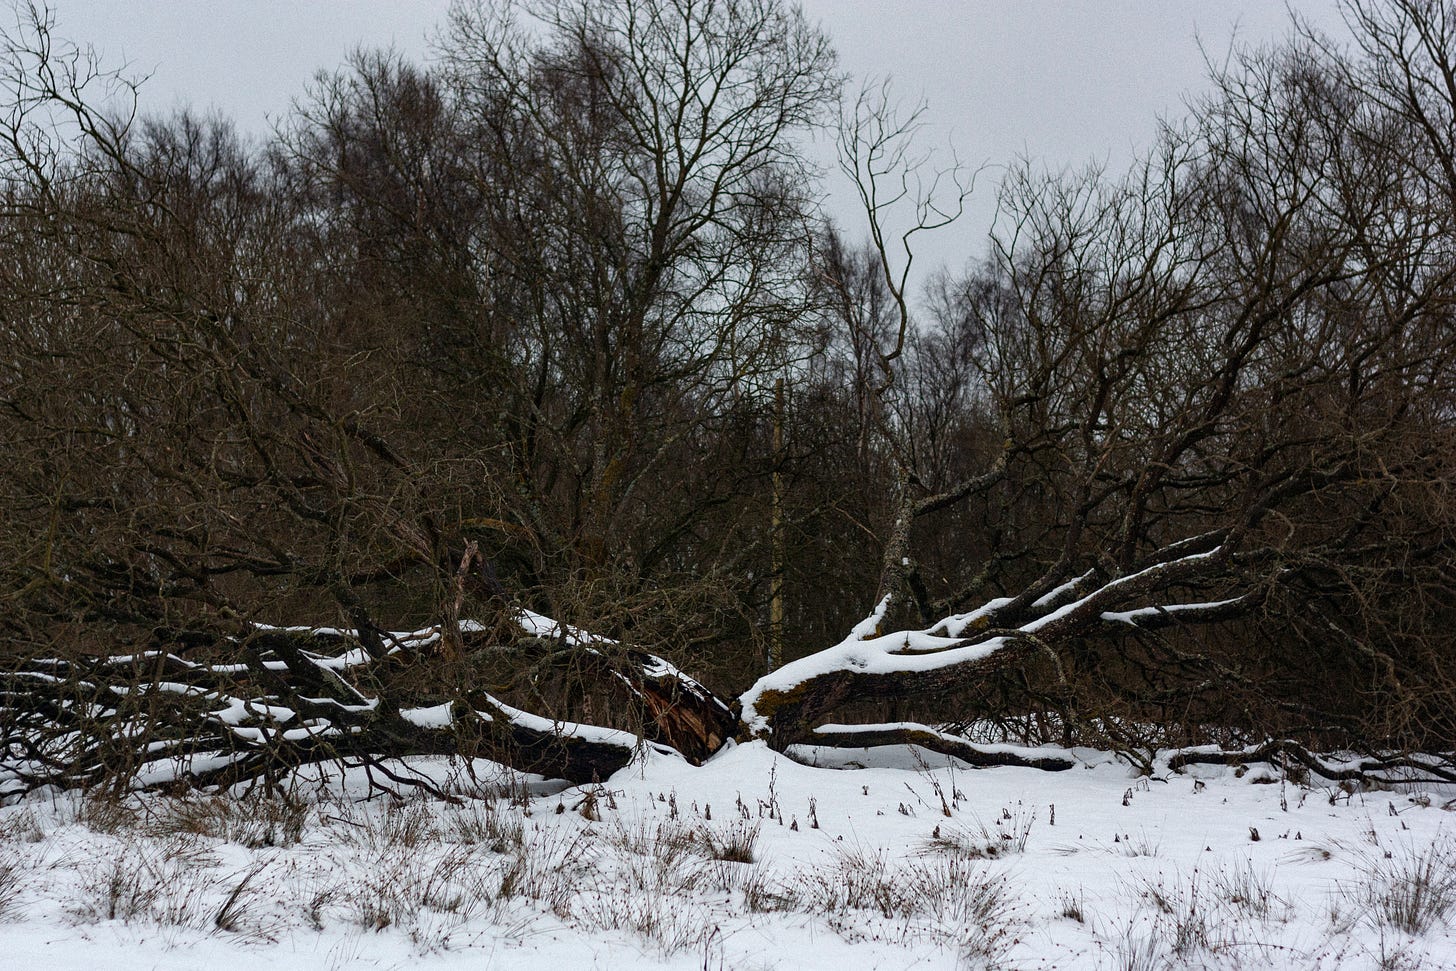 A photograph of a single tree with four large branches that sit low to the ground, covered in snow.